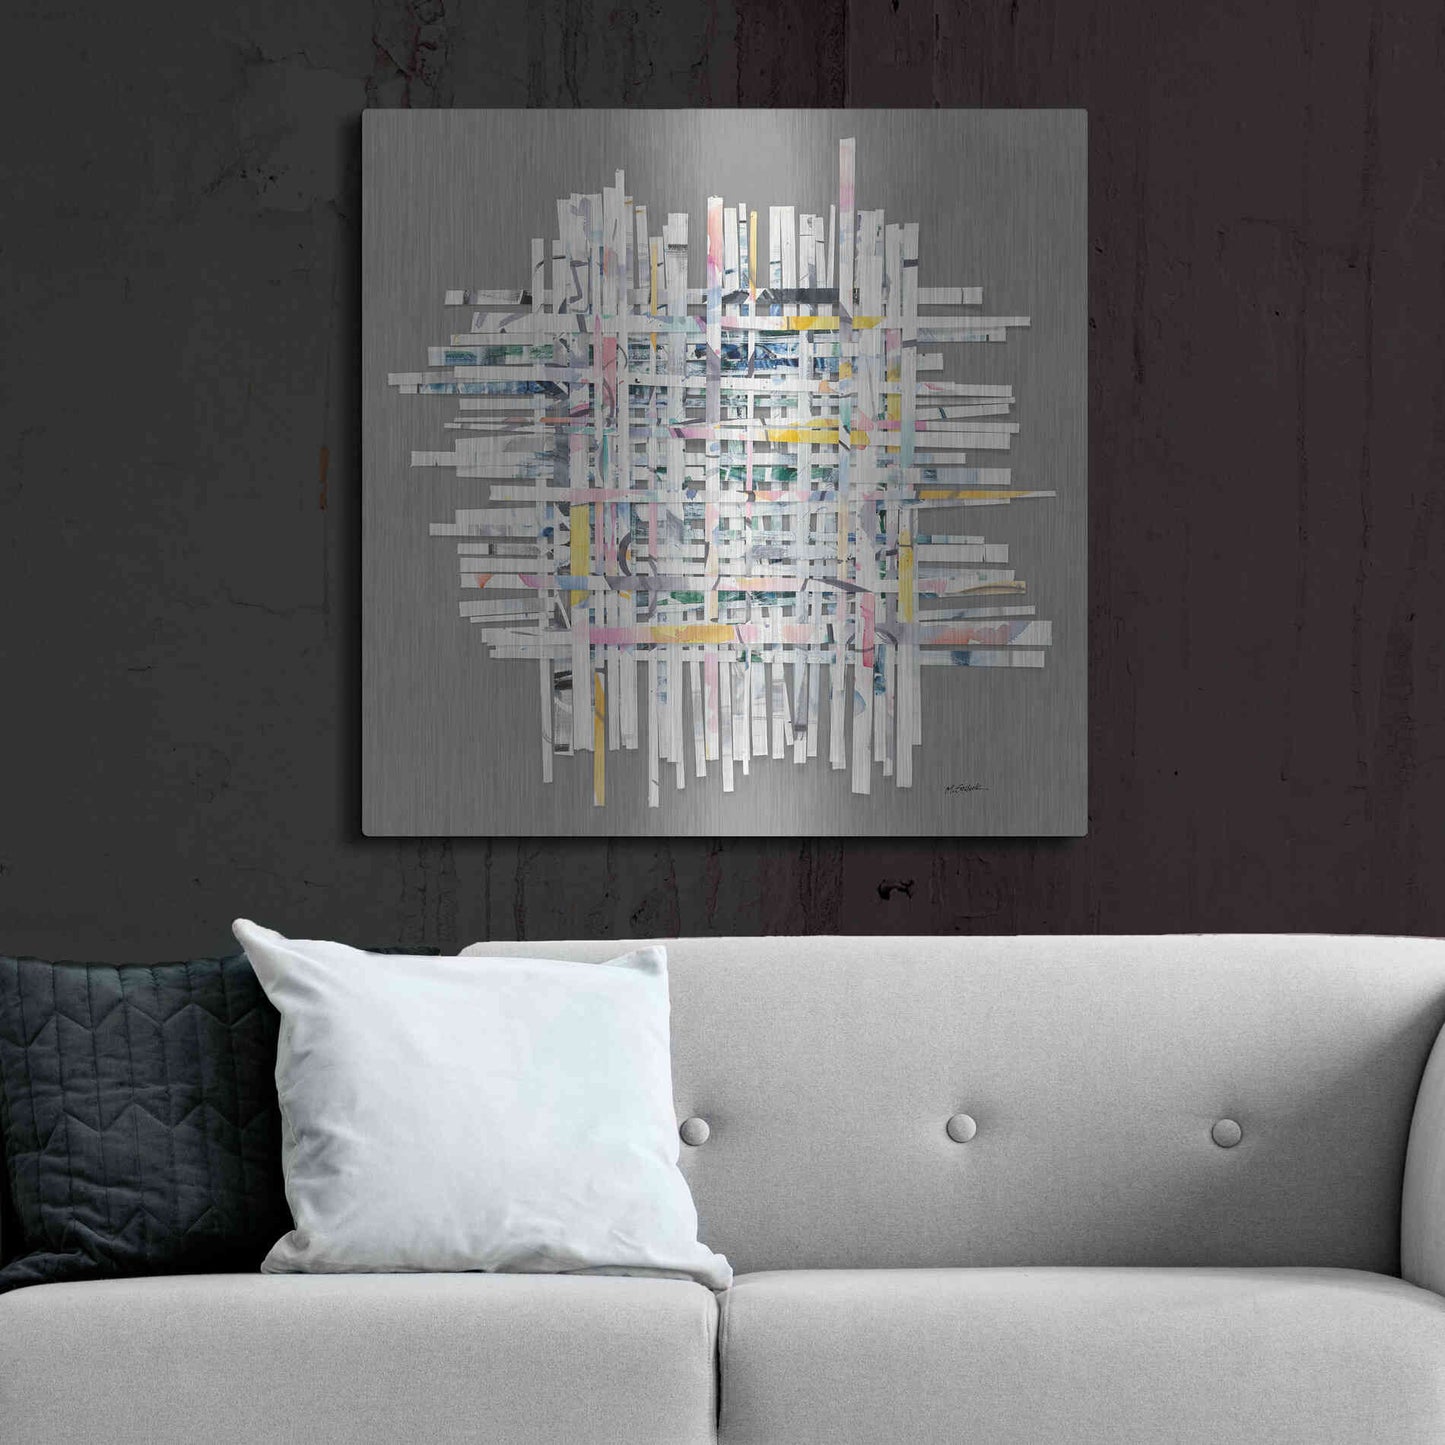 Luxe Metal Art 'New Morning On Gray' by Mike Schick, Metal Wall Art,36x36